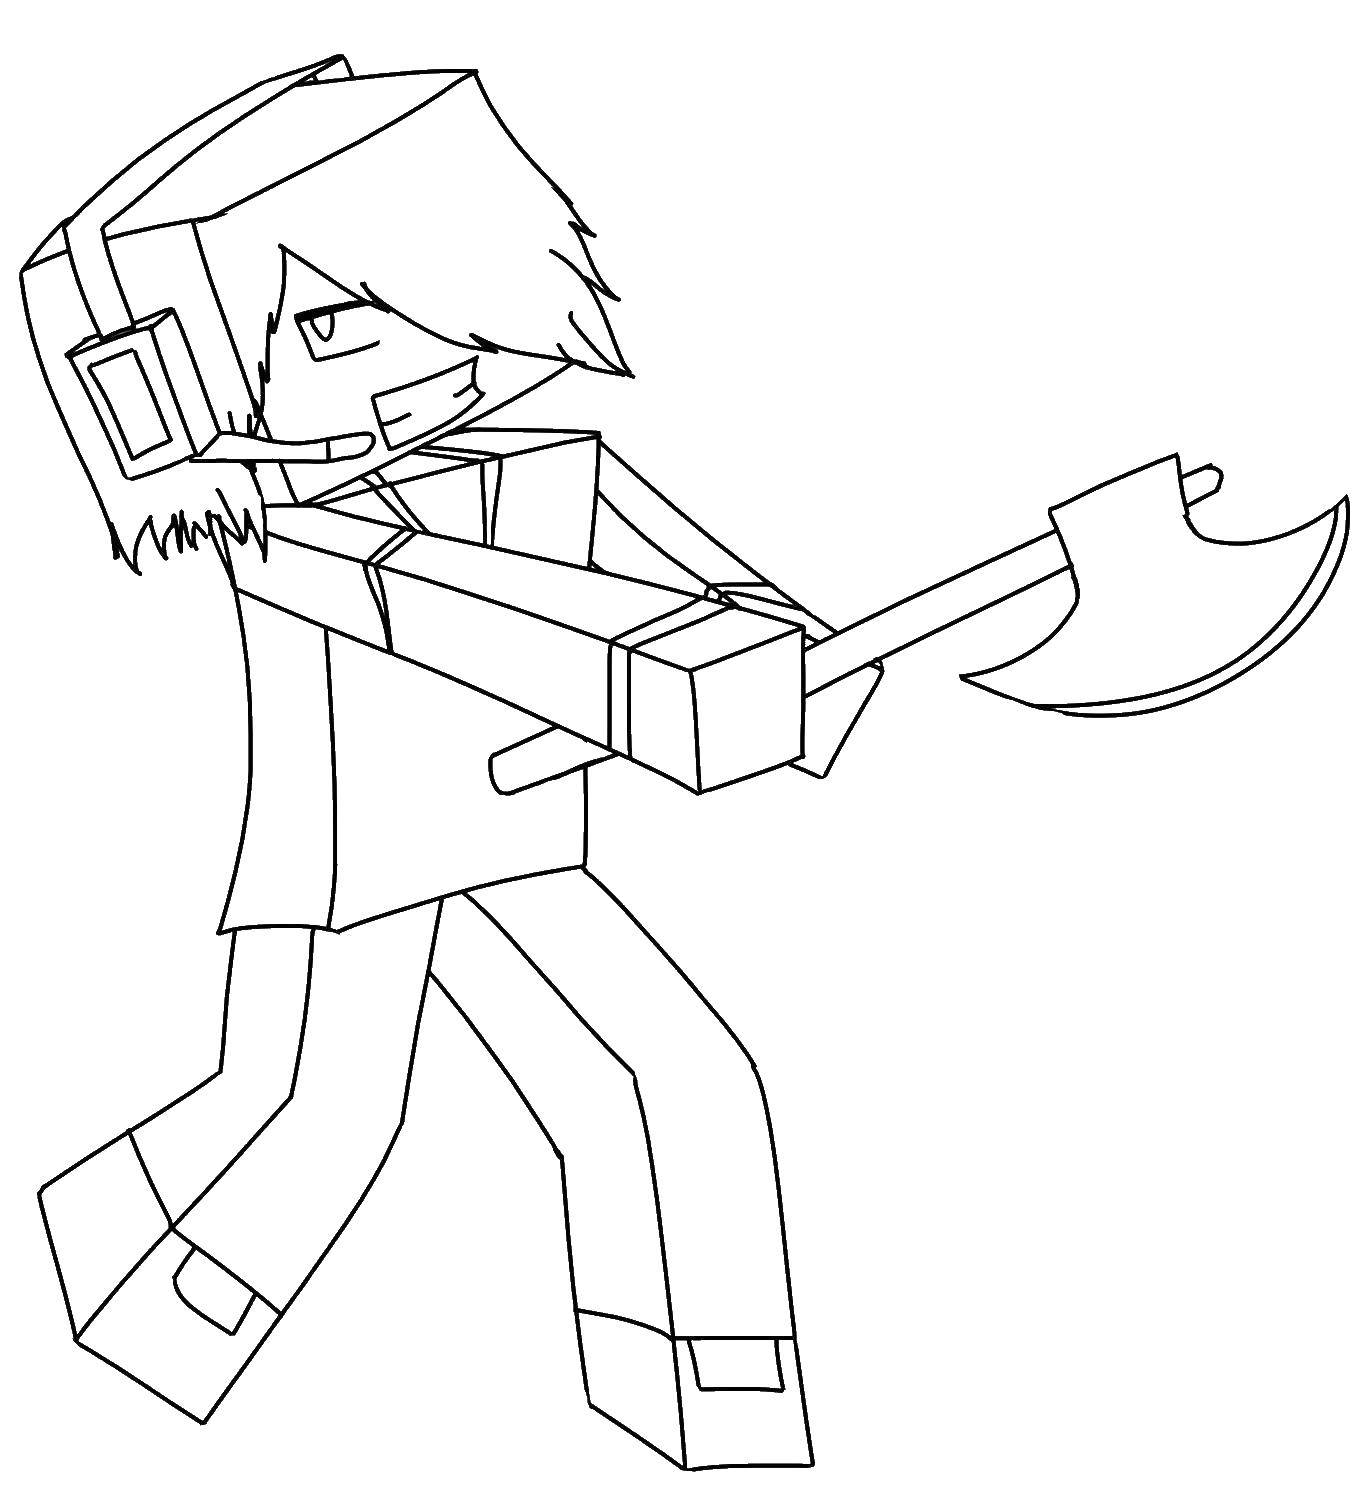 Coloring Minecraft man with an ax. Category minecraft. Tags:  minecraft, people, axe.